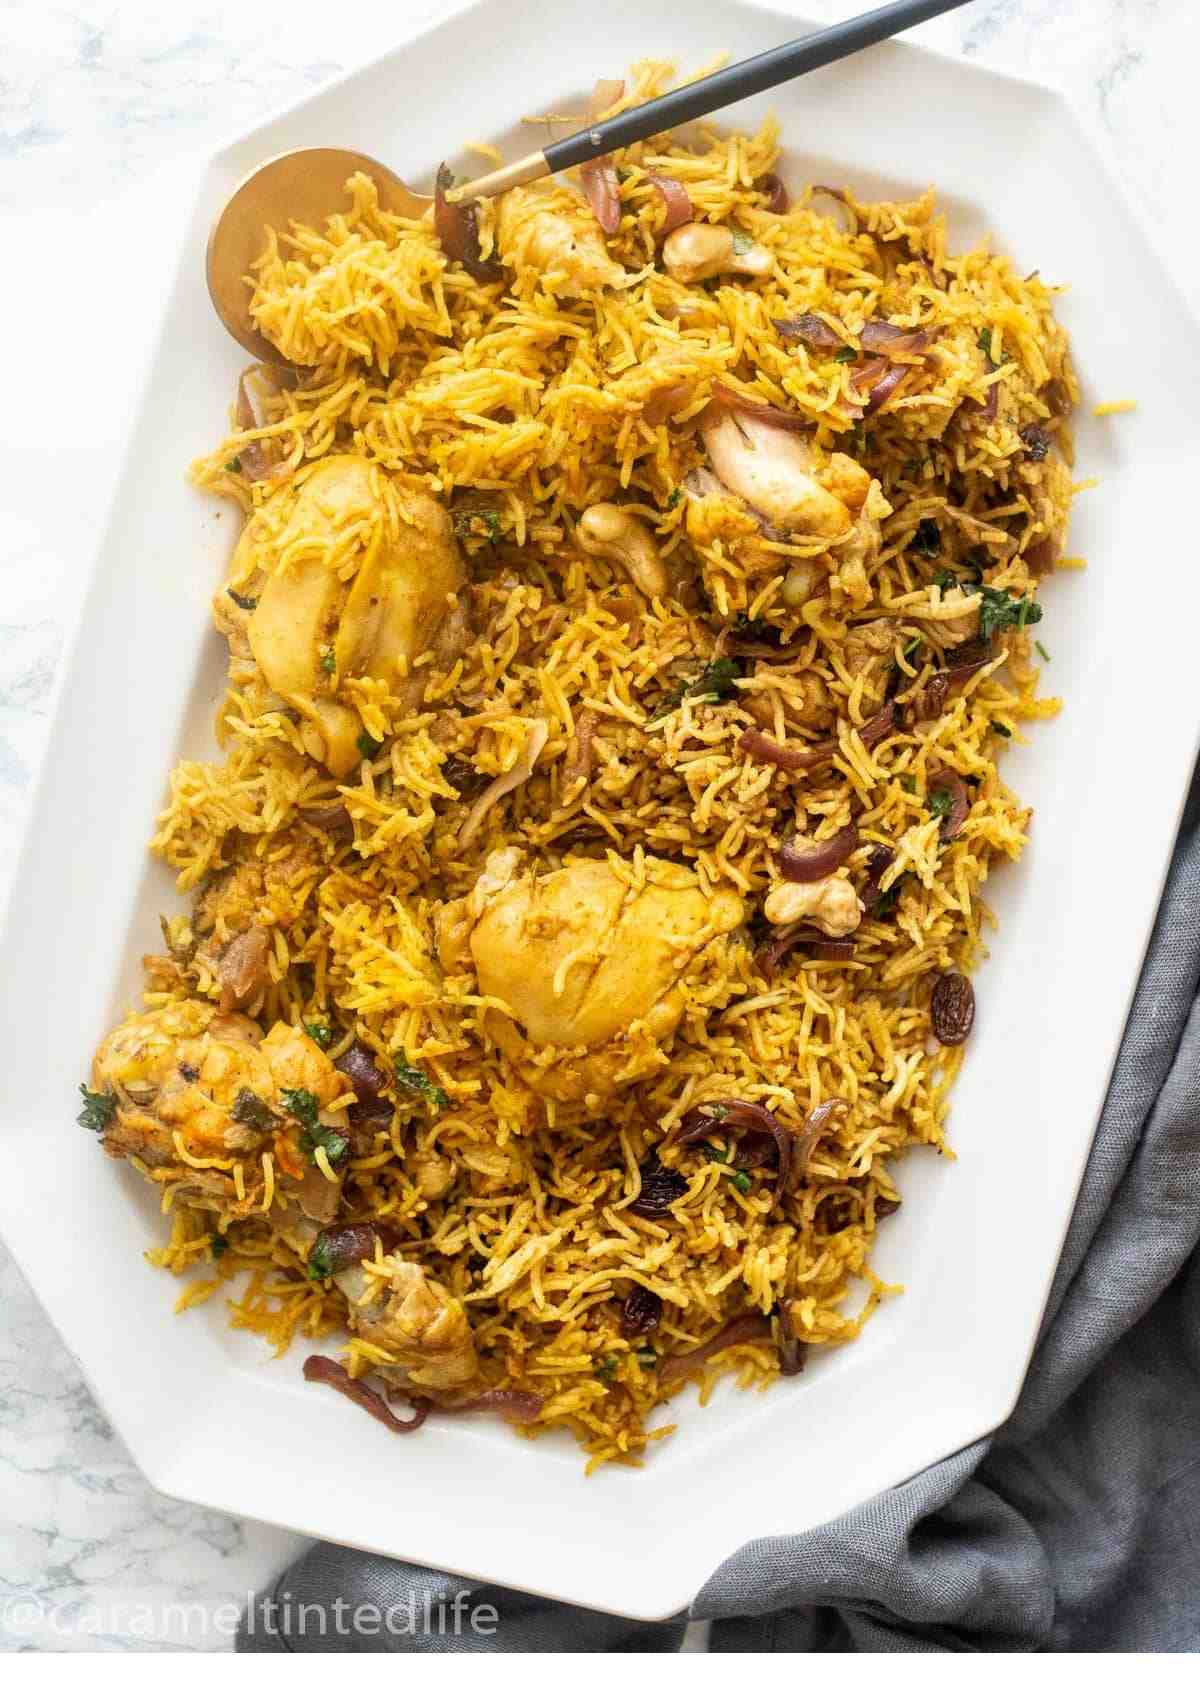 Chicken biryani served on a white tray with a spoon